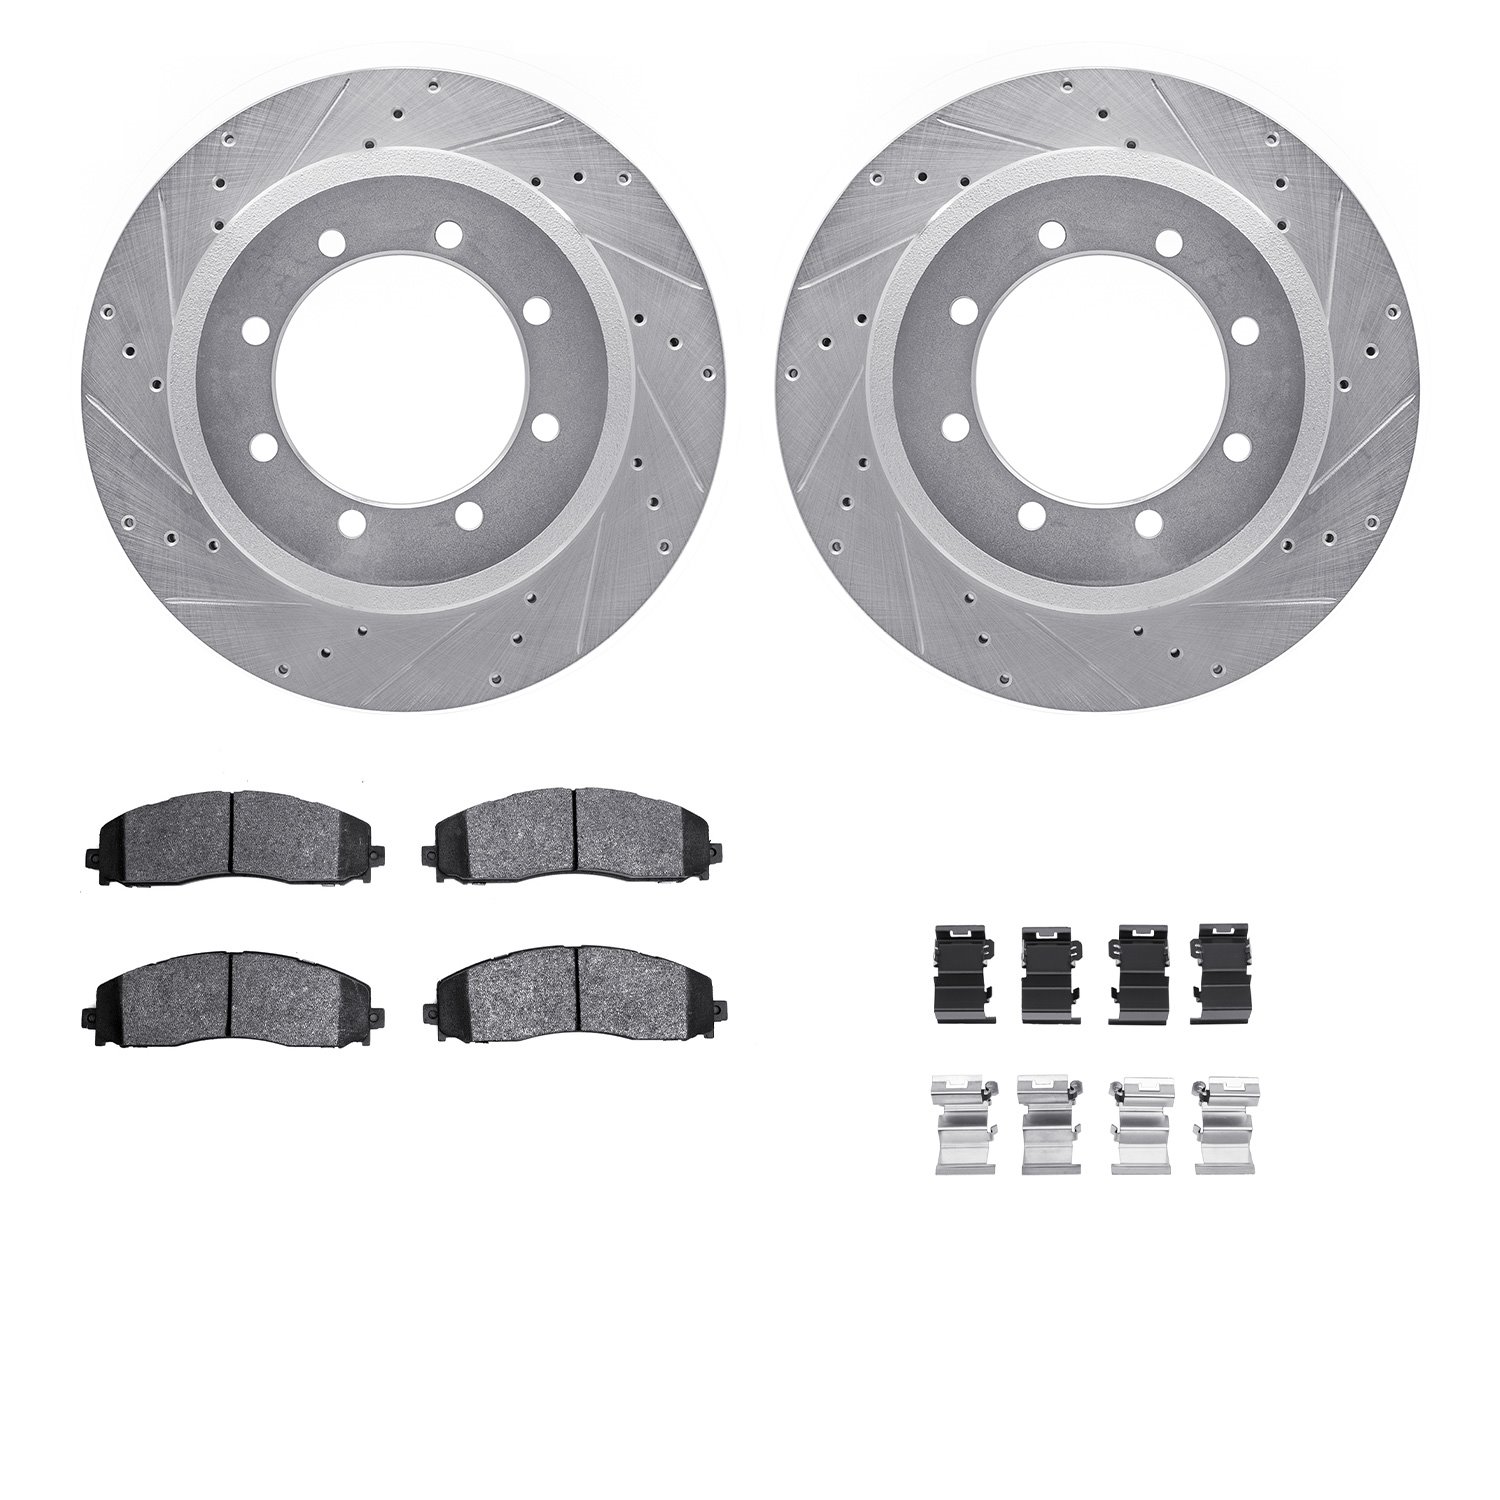 7412-54100 Drilled/Slotted Brake Rotors with Ultimate-Duty Brake Pads Kit & Hardware [Silver], Fits Select Ford/Lincoln/Mercury/